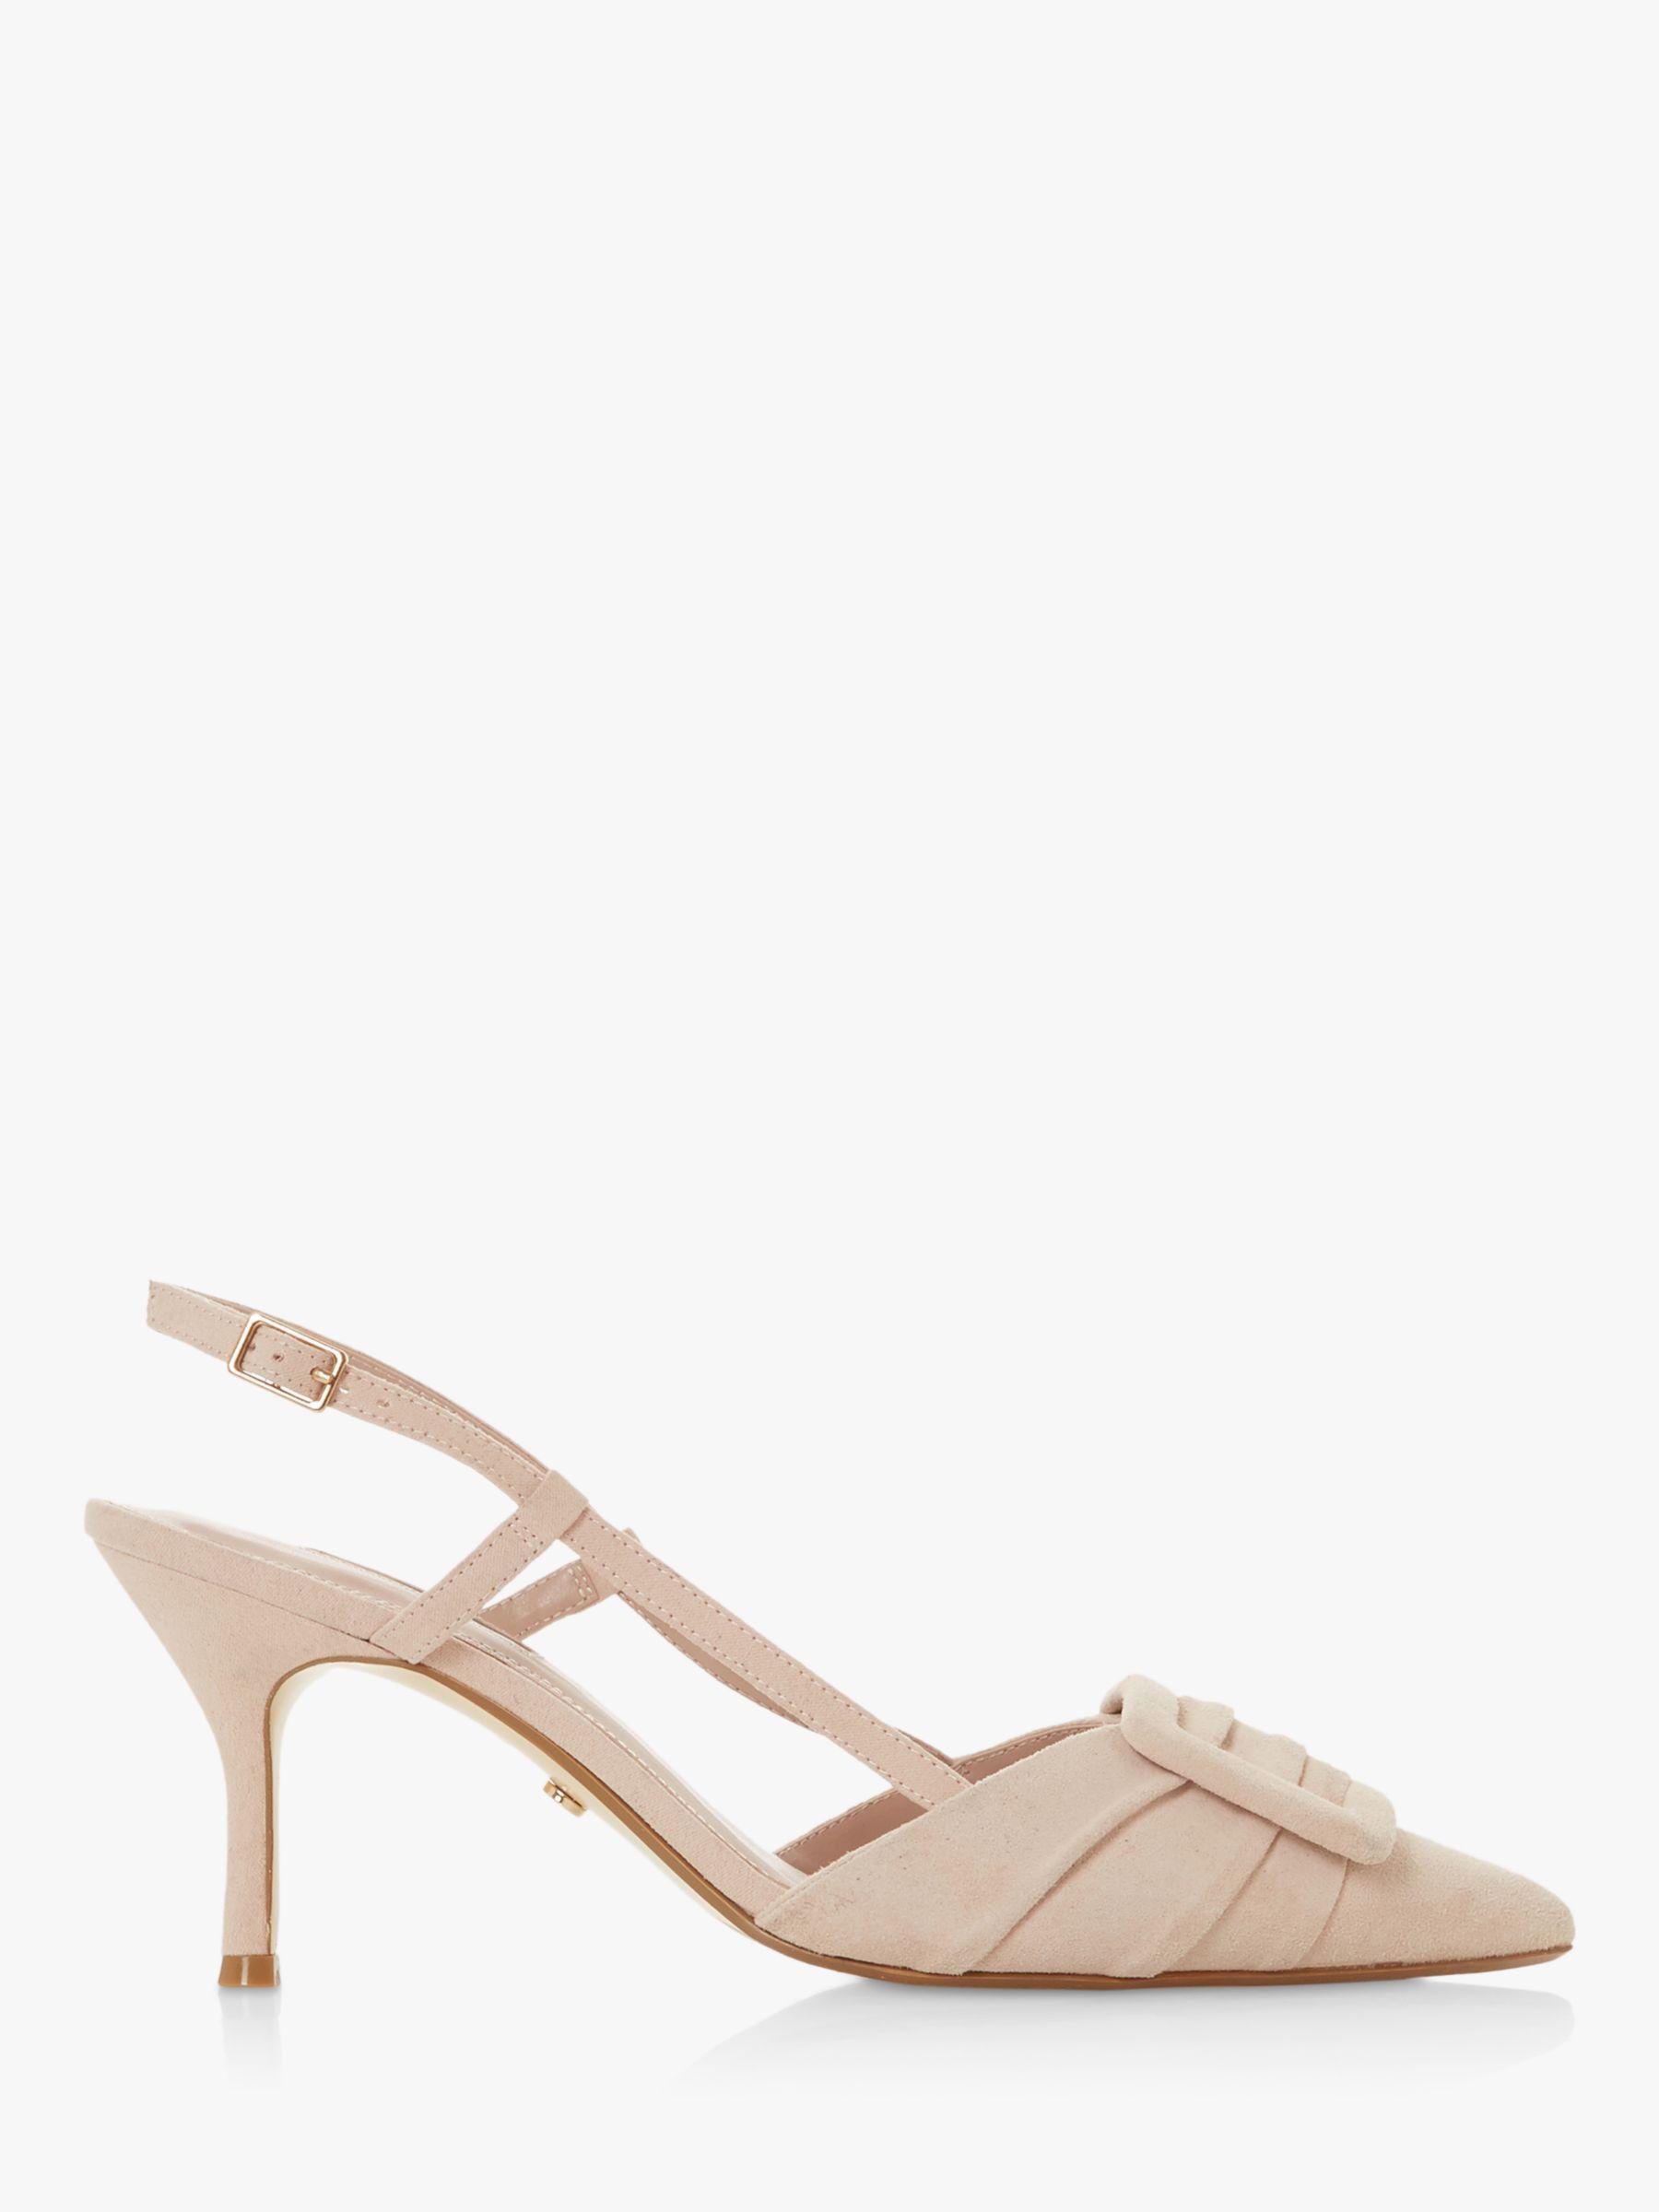 Dune Suede Daena Pointed Slingback Shoes in Blush Suede (Natural) - Lyst